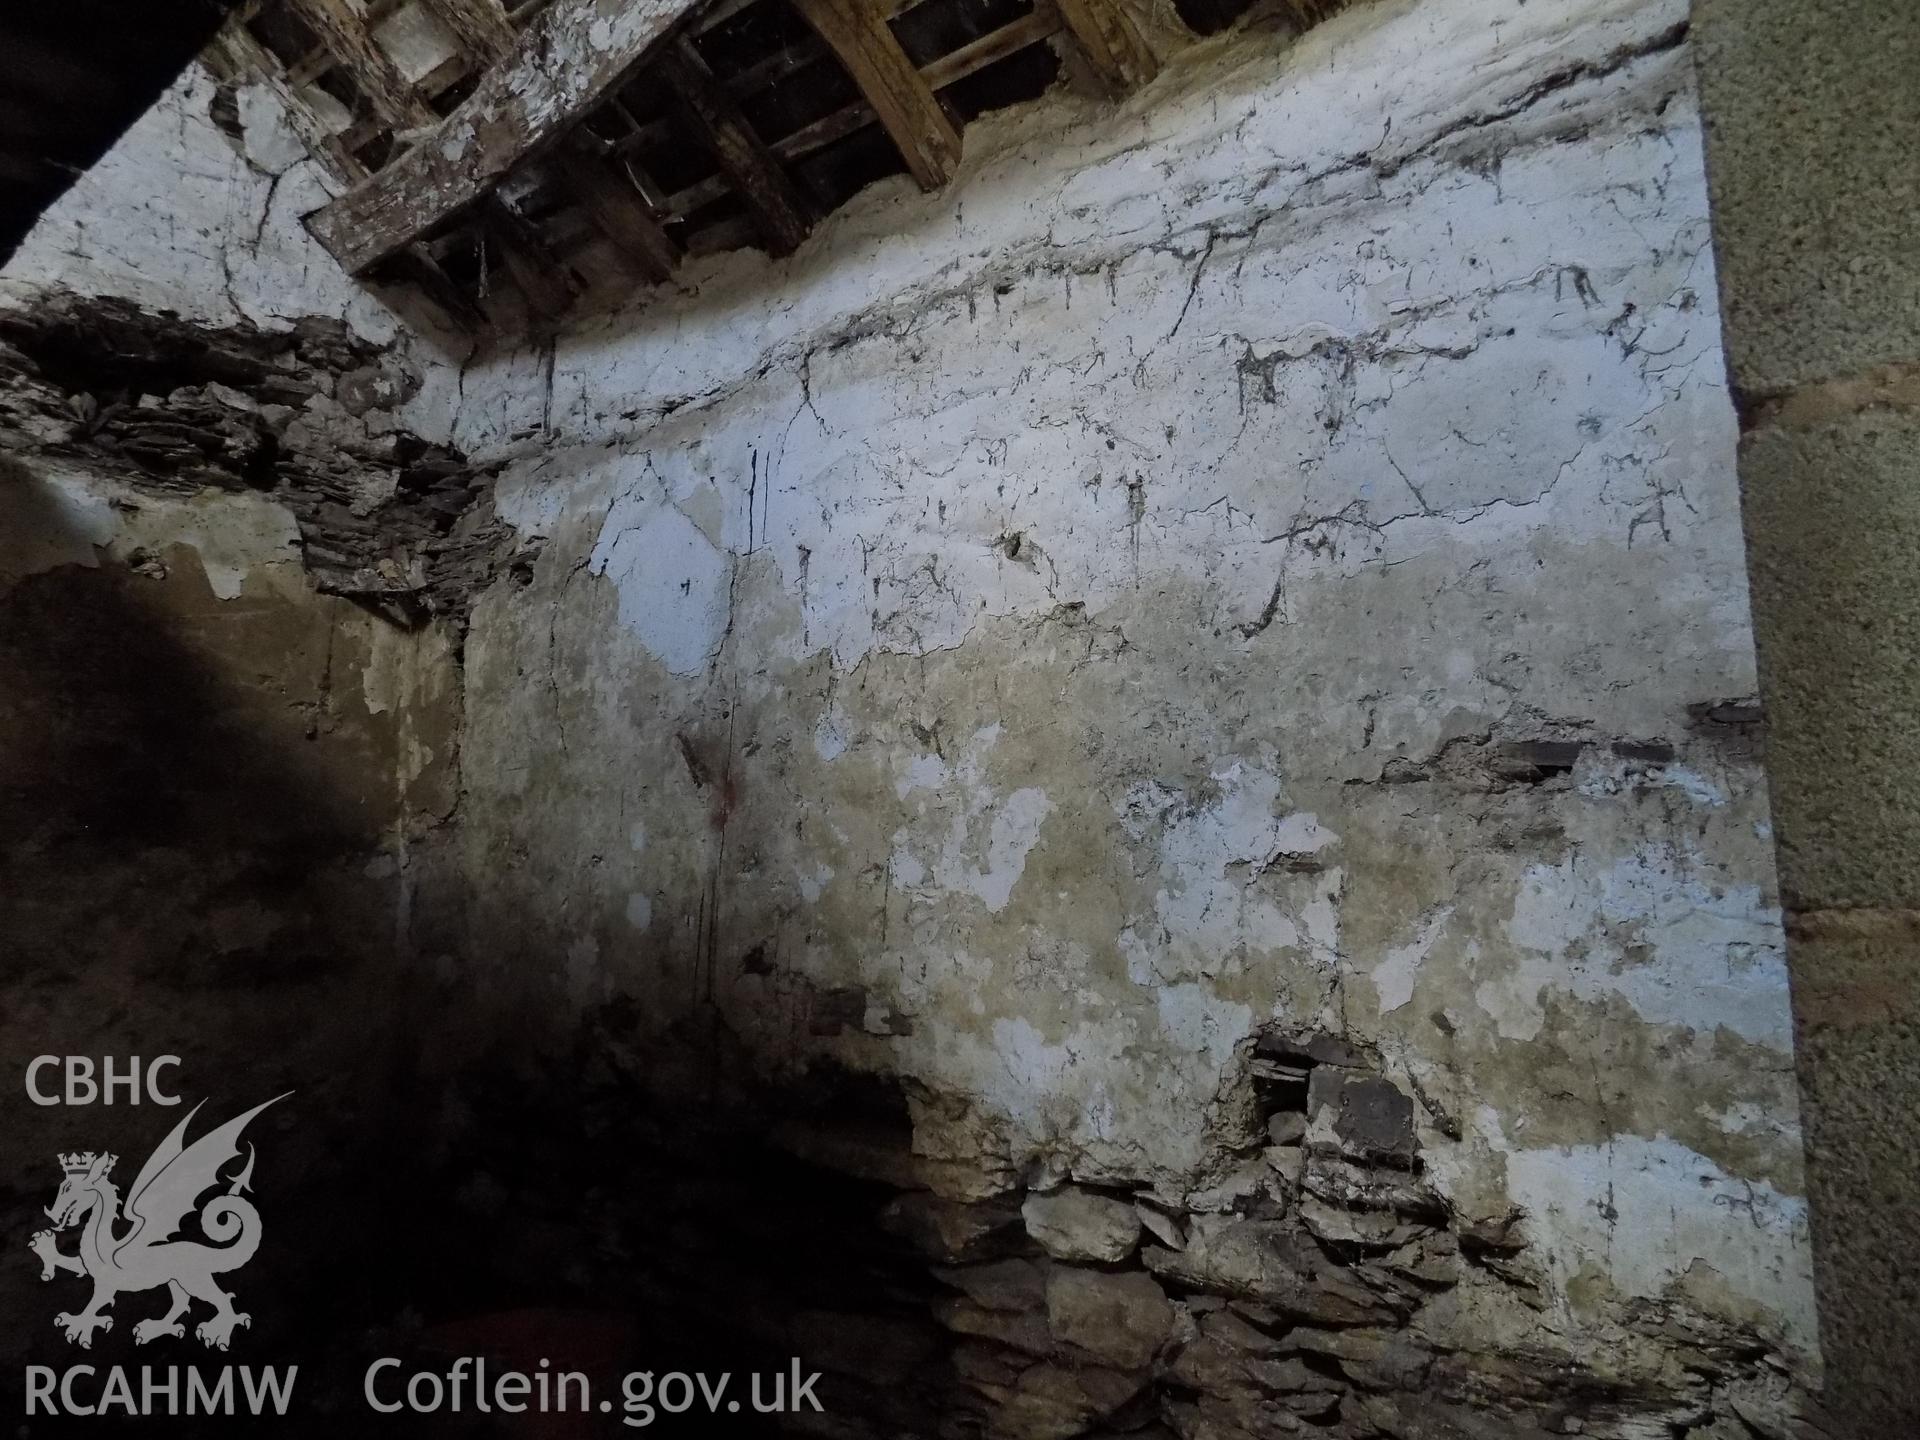 Digital colour photograph showing interior view of internal wall in building attached to Tywyll Nodwydd house, Pennal, dated 2019. Photographed by Mr Gary Coulsby to meet a condition attached to a planning application.